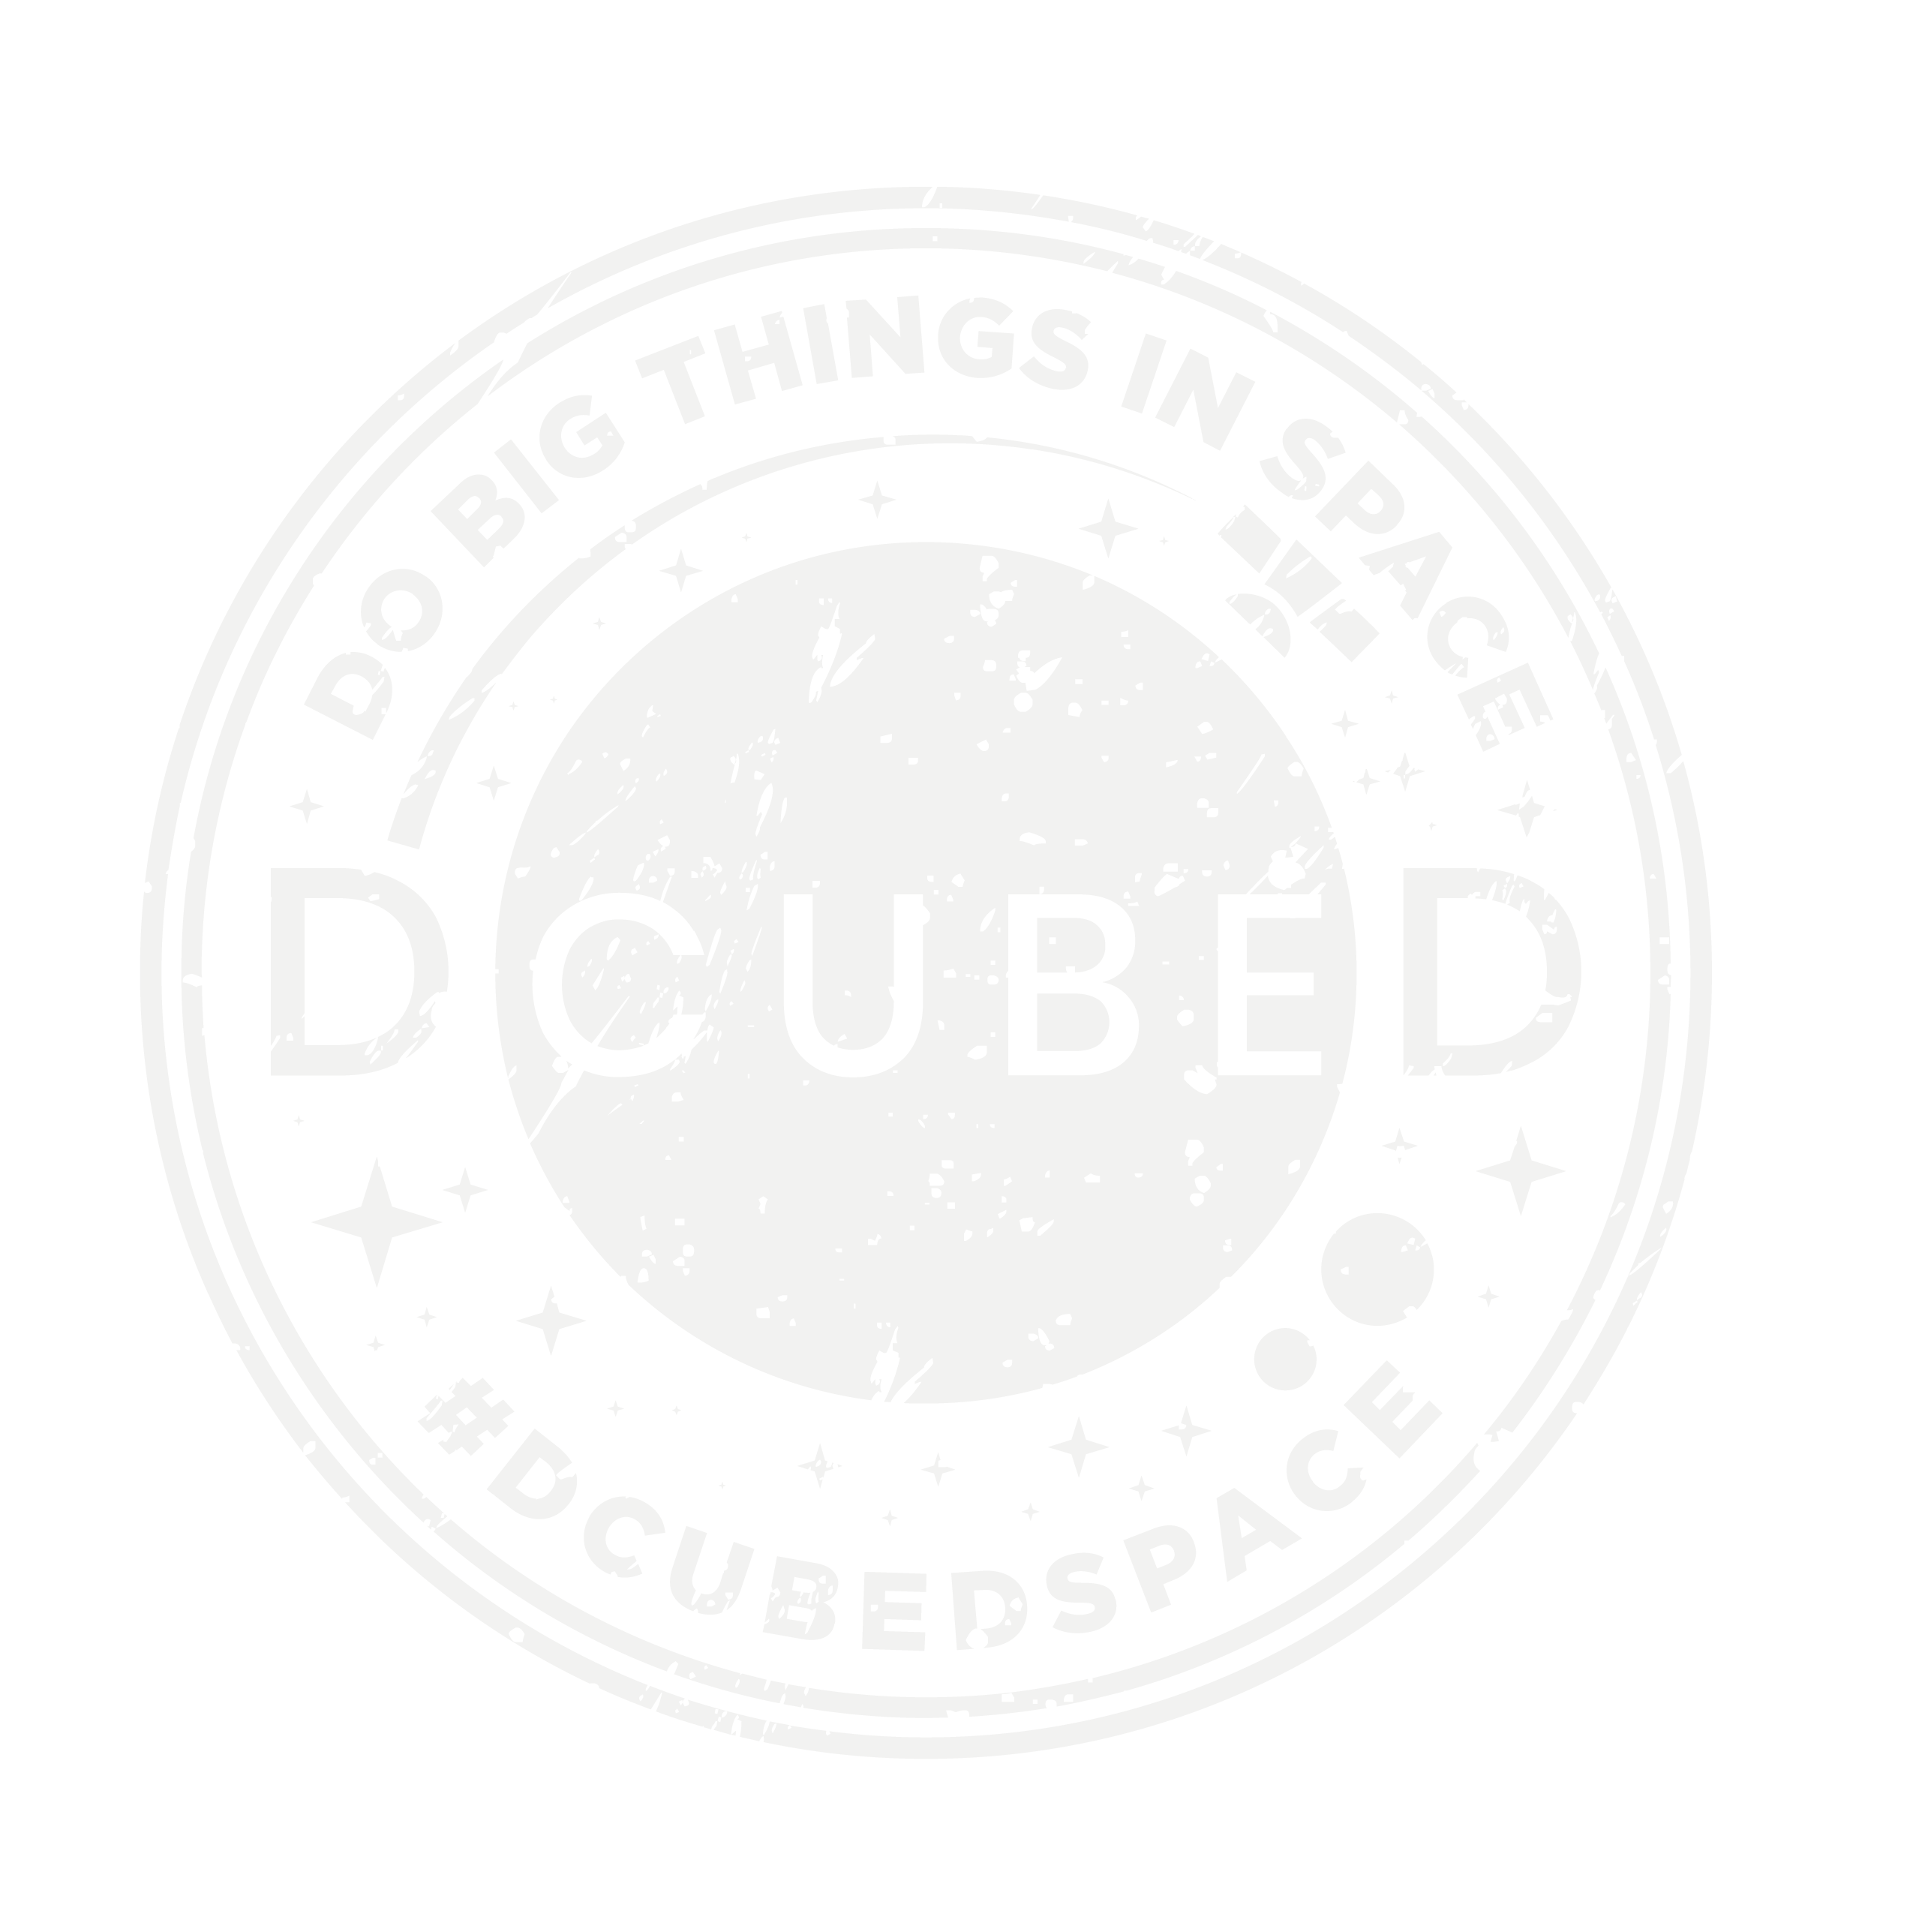 DCUBED - Do big things in space - badge